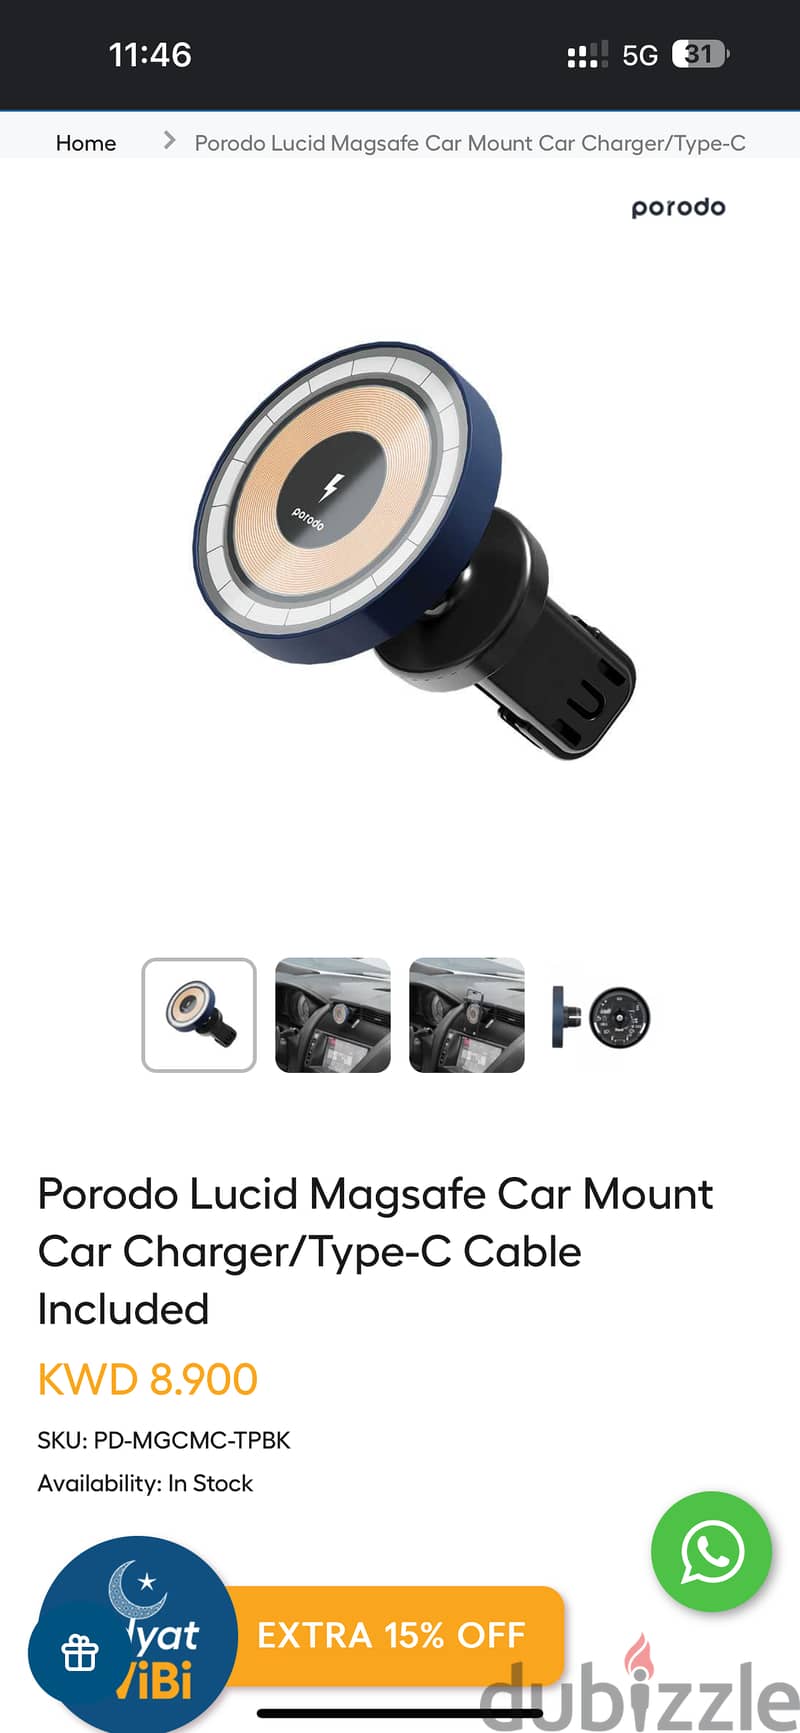 Porodo Lucid Magsafe Car Mount Car Charger/Type-C Cable Included 4